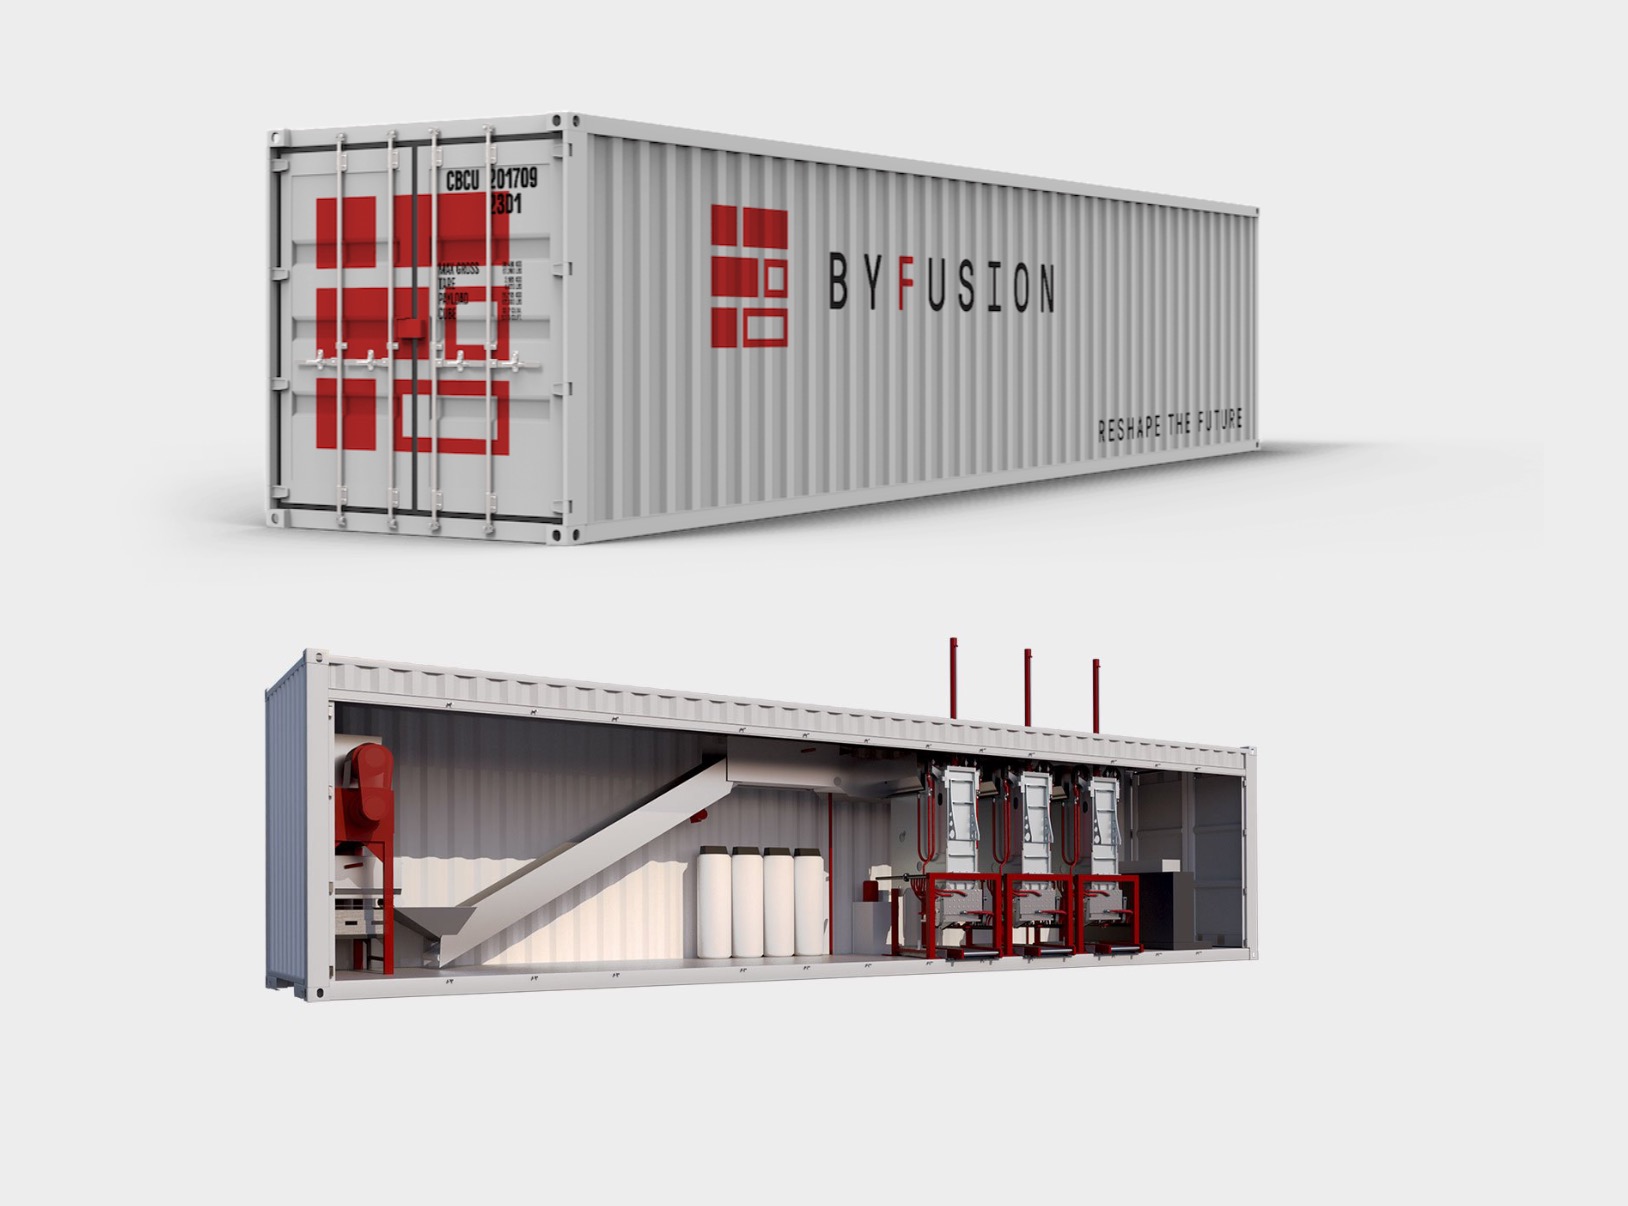 * Designed for smaller material recycling facilities, waste management operations, municipalities, and corporate partners * Processes up to 30 tons per month * Conforms to California emissions standards * Modular installation – ships standard shipping containers.